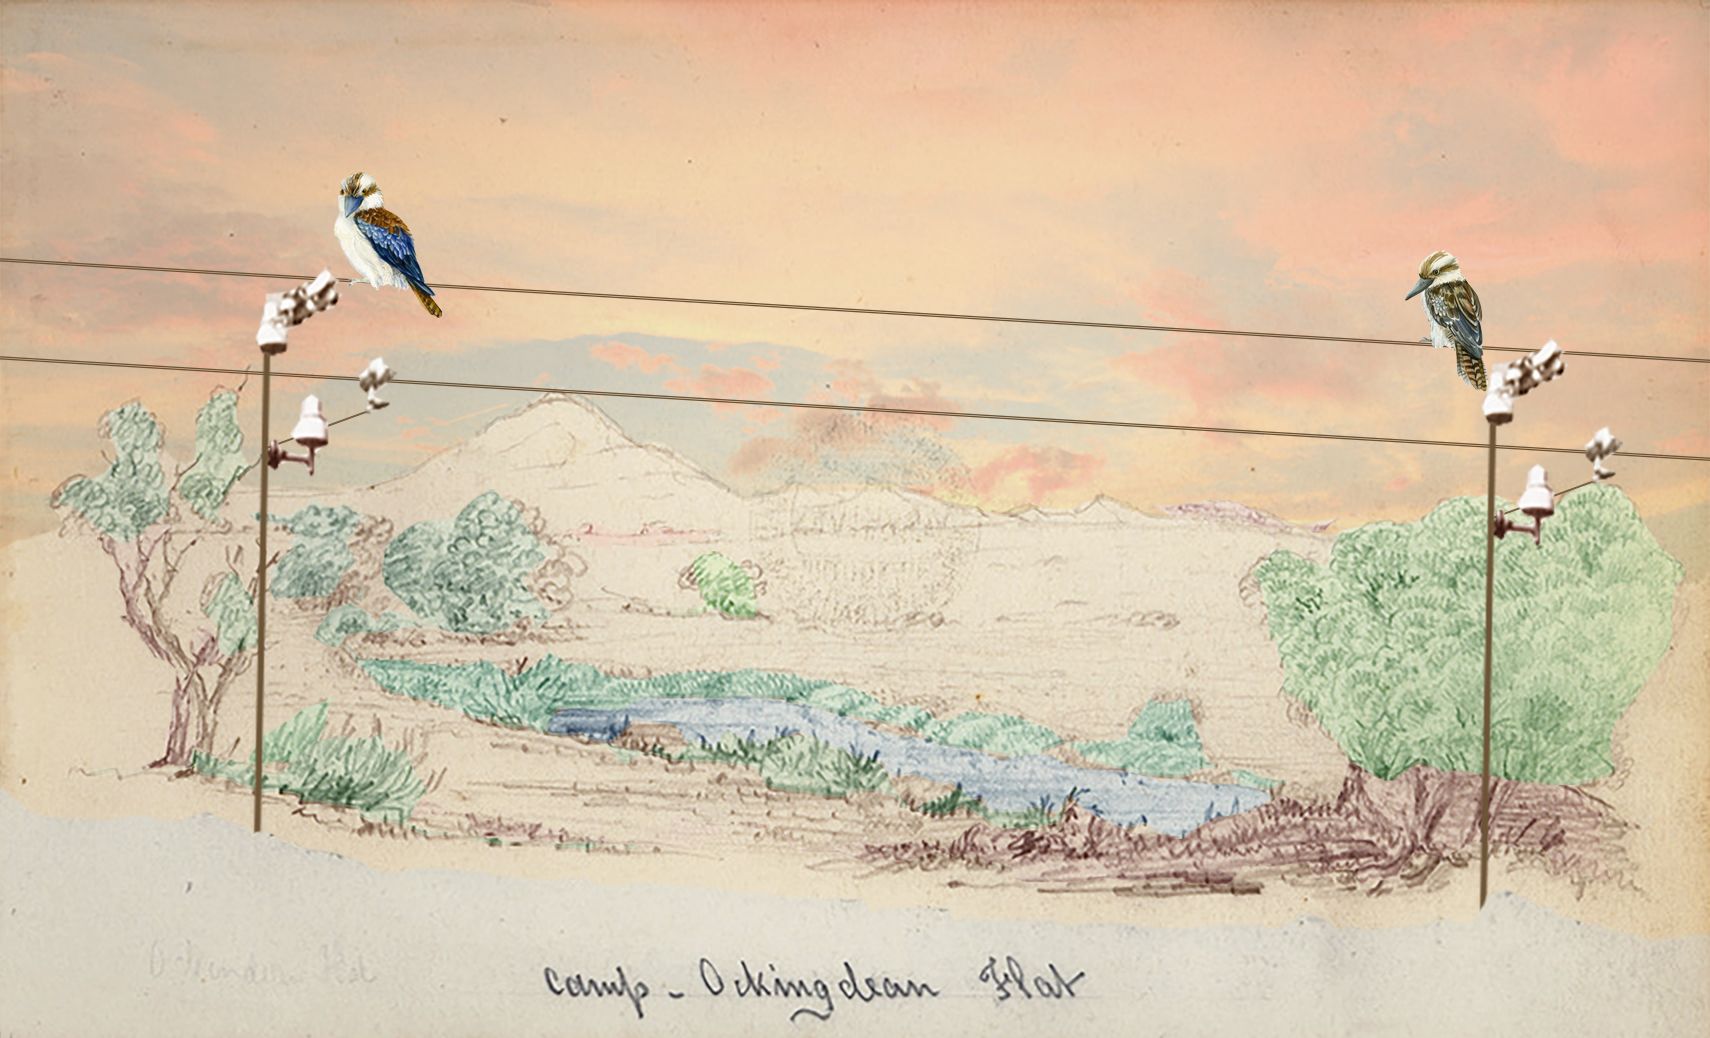 A colourised version of a sketch by Babbage featuring the Ockingdean Flat, which was one of the locations where the OTL was installed. SLSA: PRG 404/19/3/64